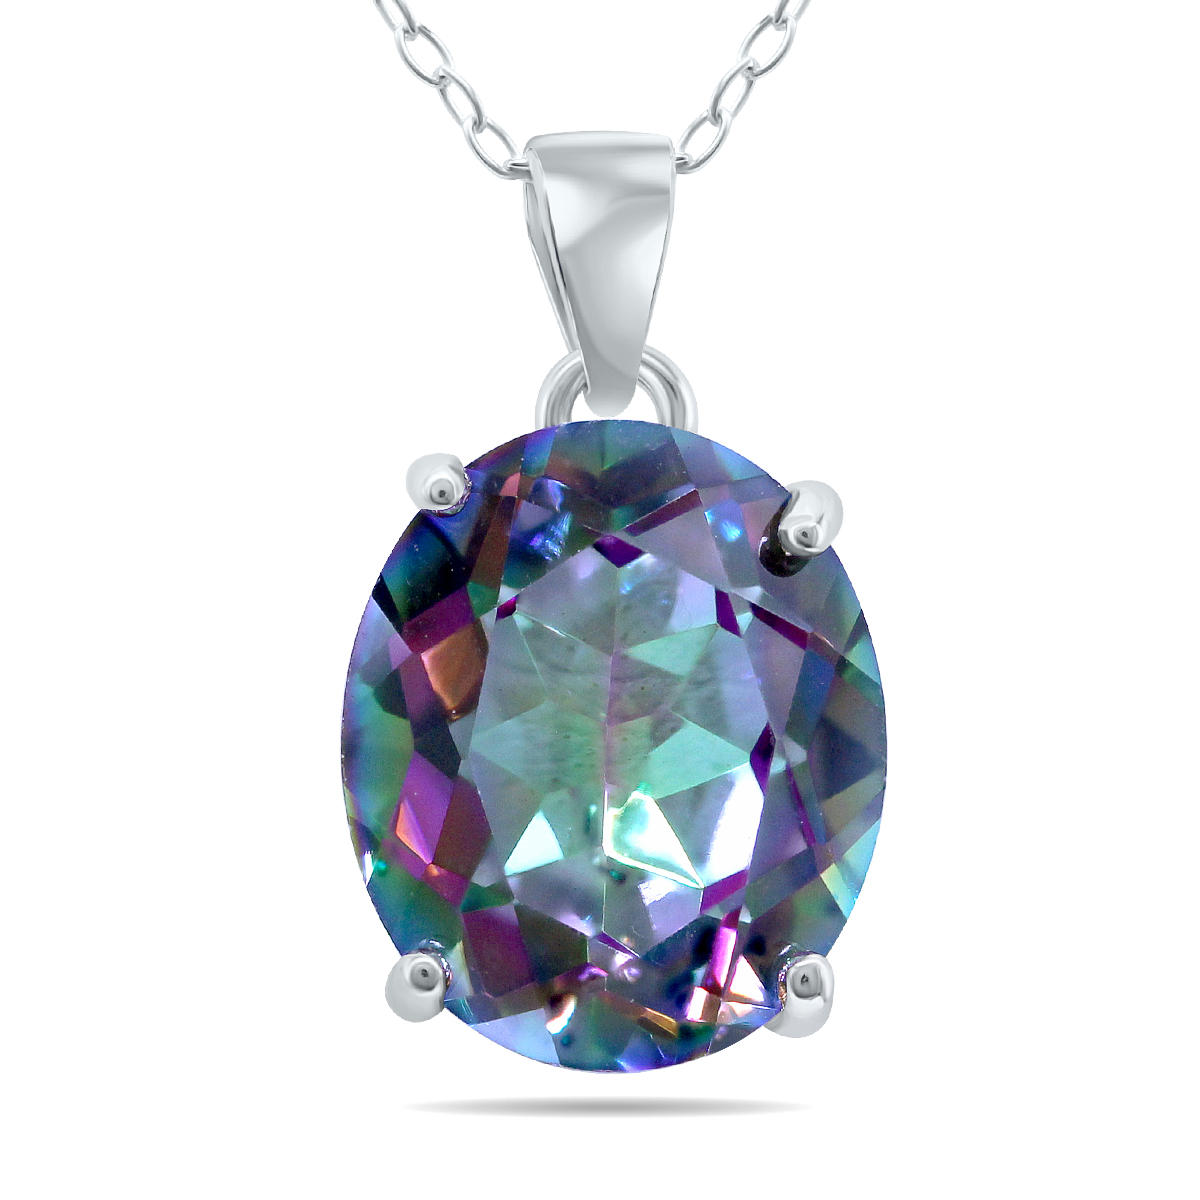 12X10mm Oval Mystic Topaz Pendant in .925 Sterling Silver